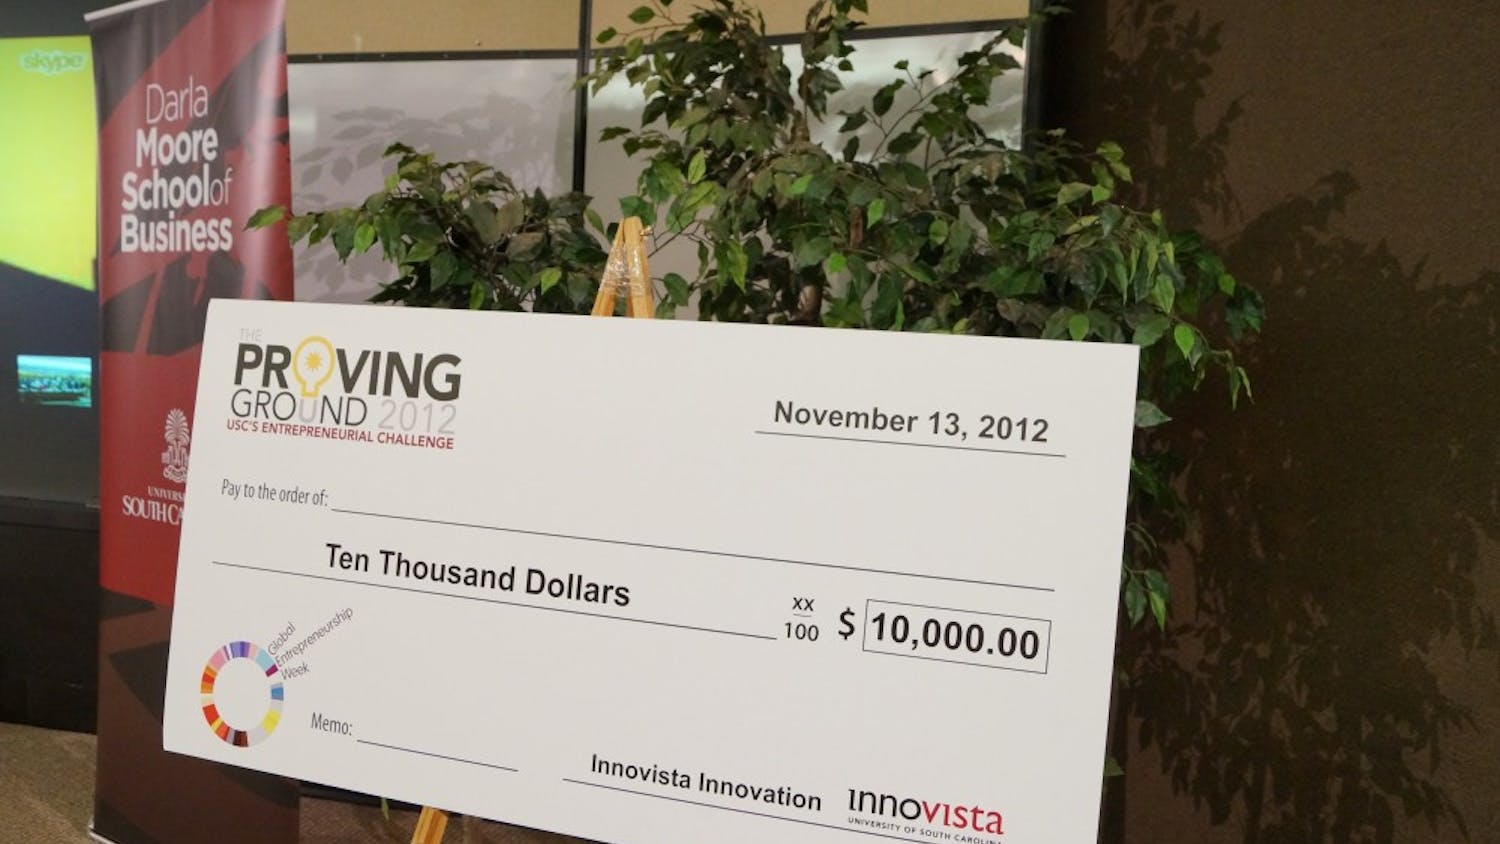 	This year, the Proving Ground entrepreneurship competition offers a total of $45,000 in prizes to the winners in three categories: technology, innoation and social impact.